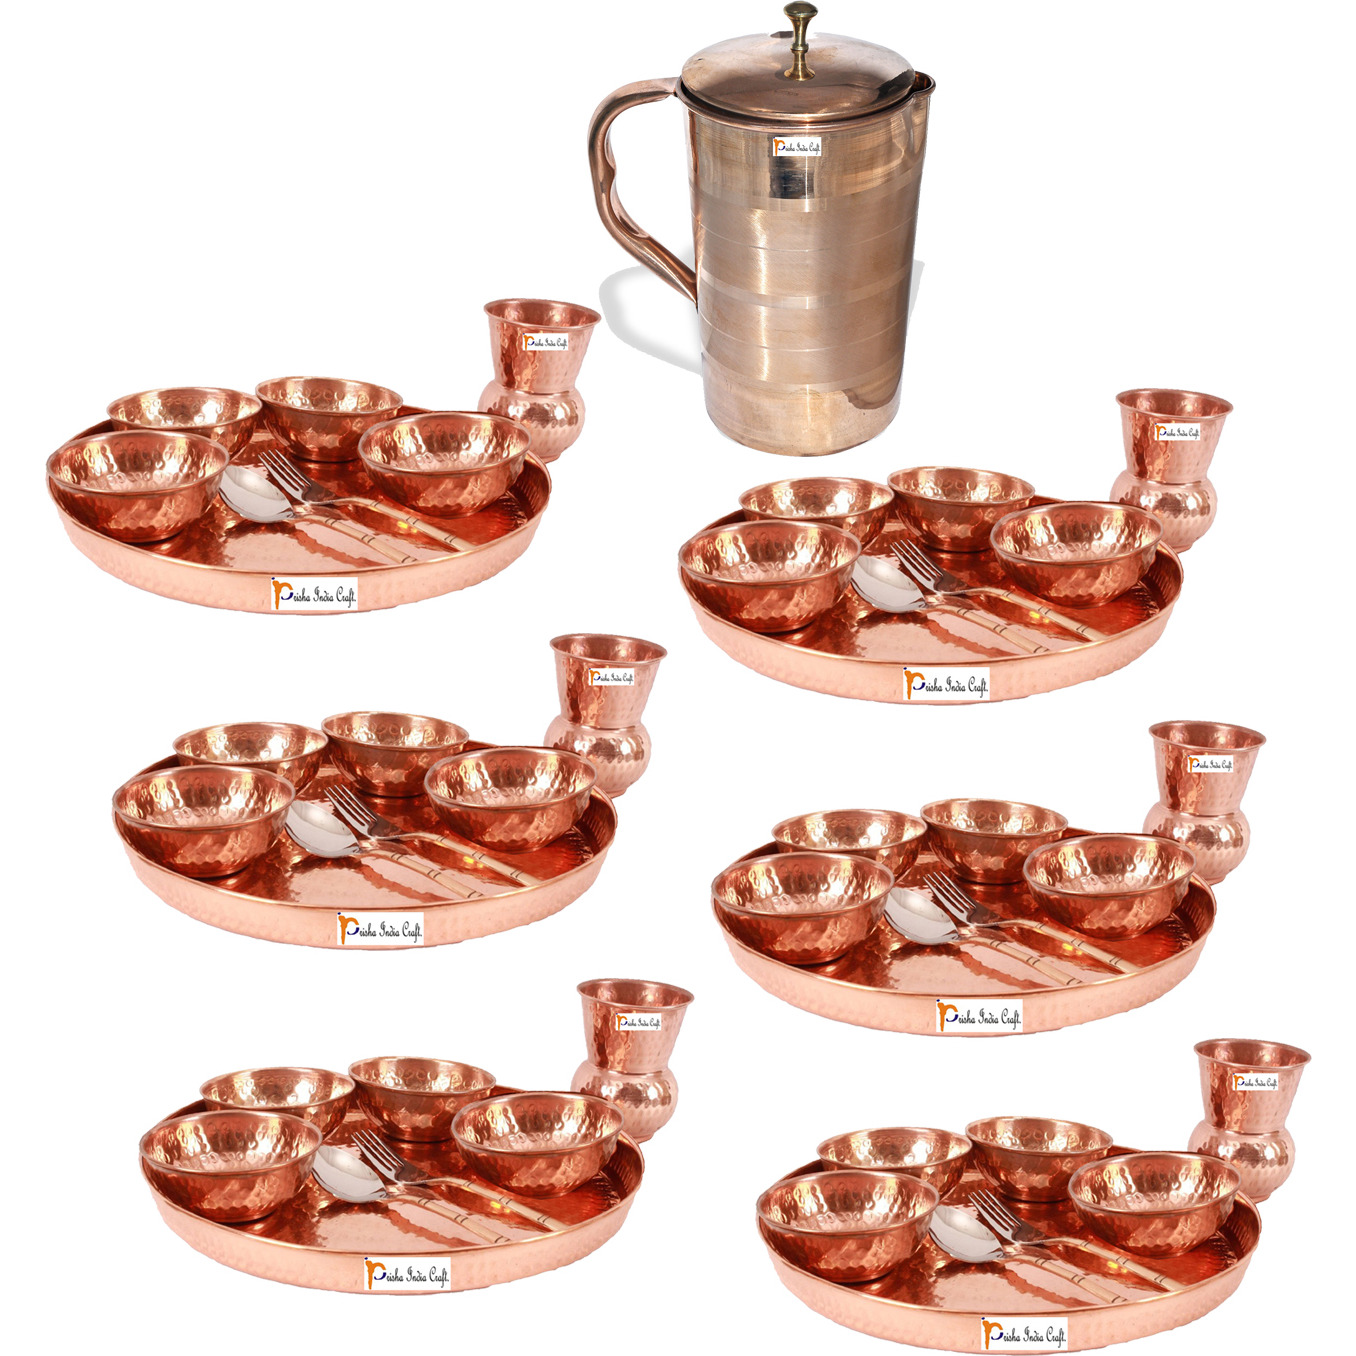 Prisha India Craft B. Set of 6 Dinnerware Traditional 100% Pure Copper Dinner Set of Thali Plate, Bowls, Glass and Spoon, Dia 12  With 1 Luxury Style Pure Copper Pitcher Jug - Christmas Gift